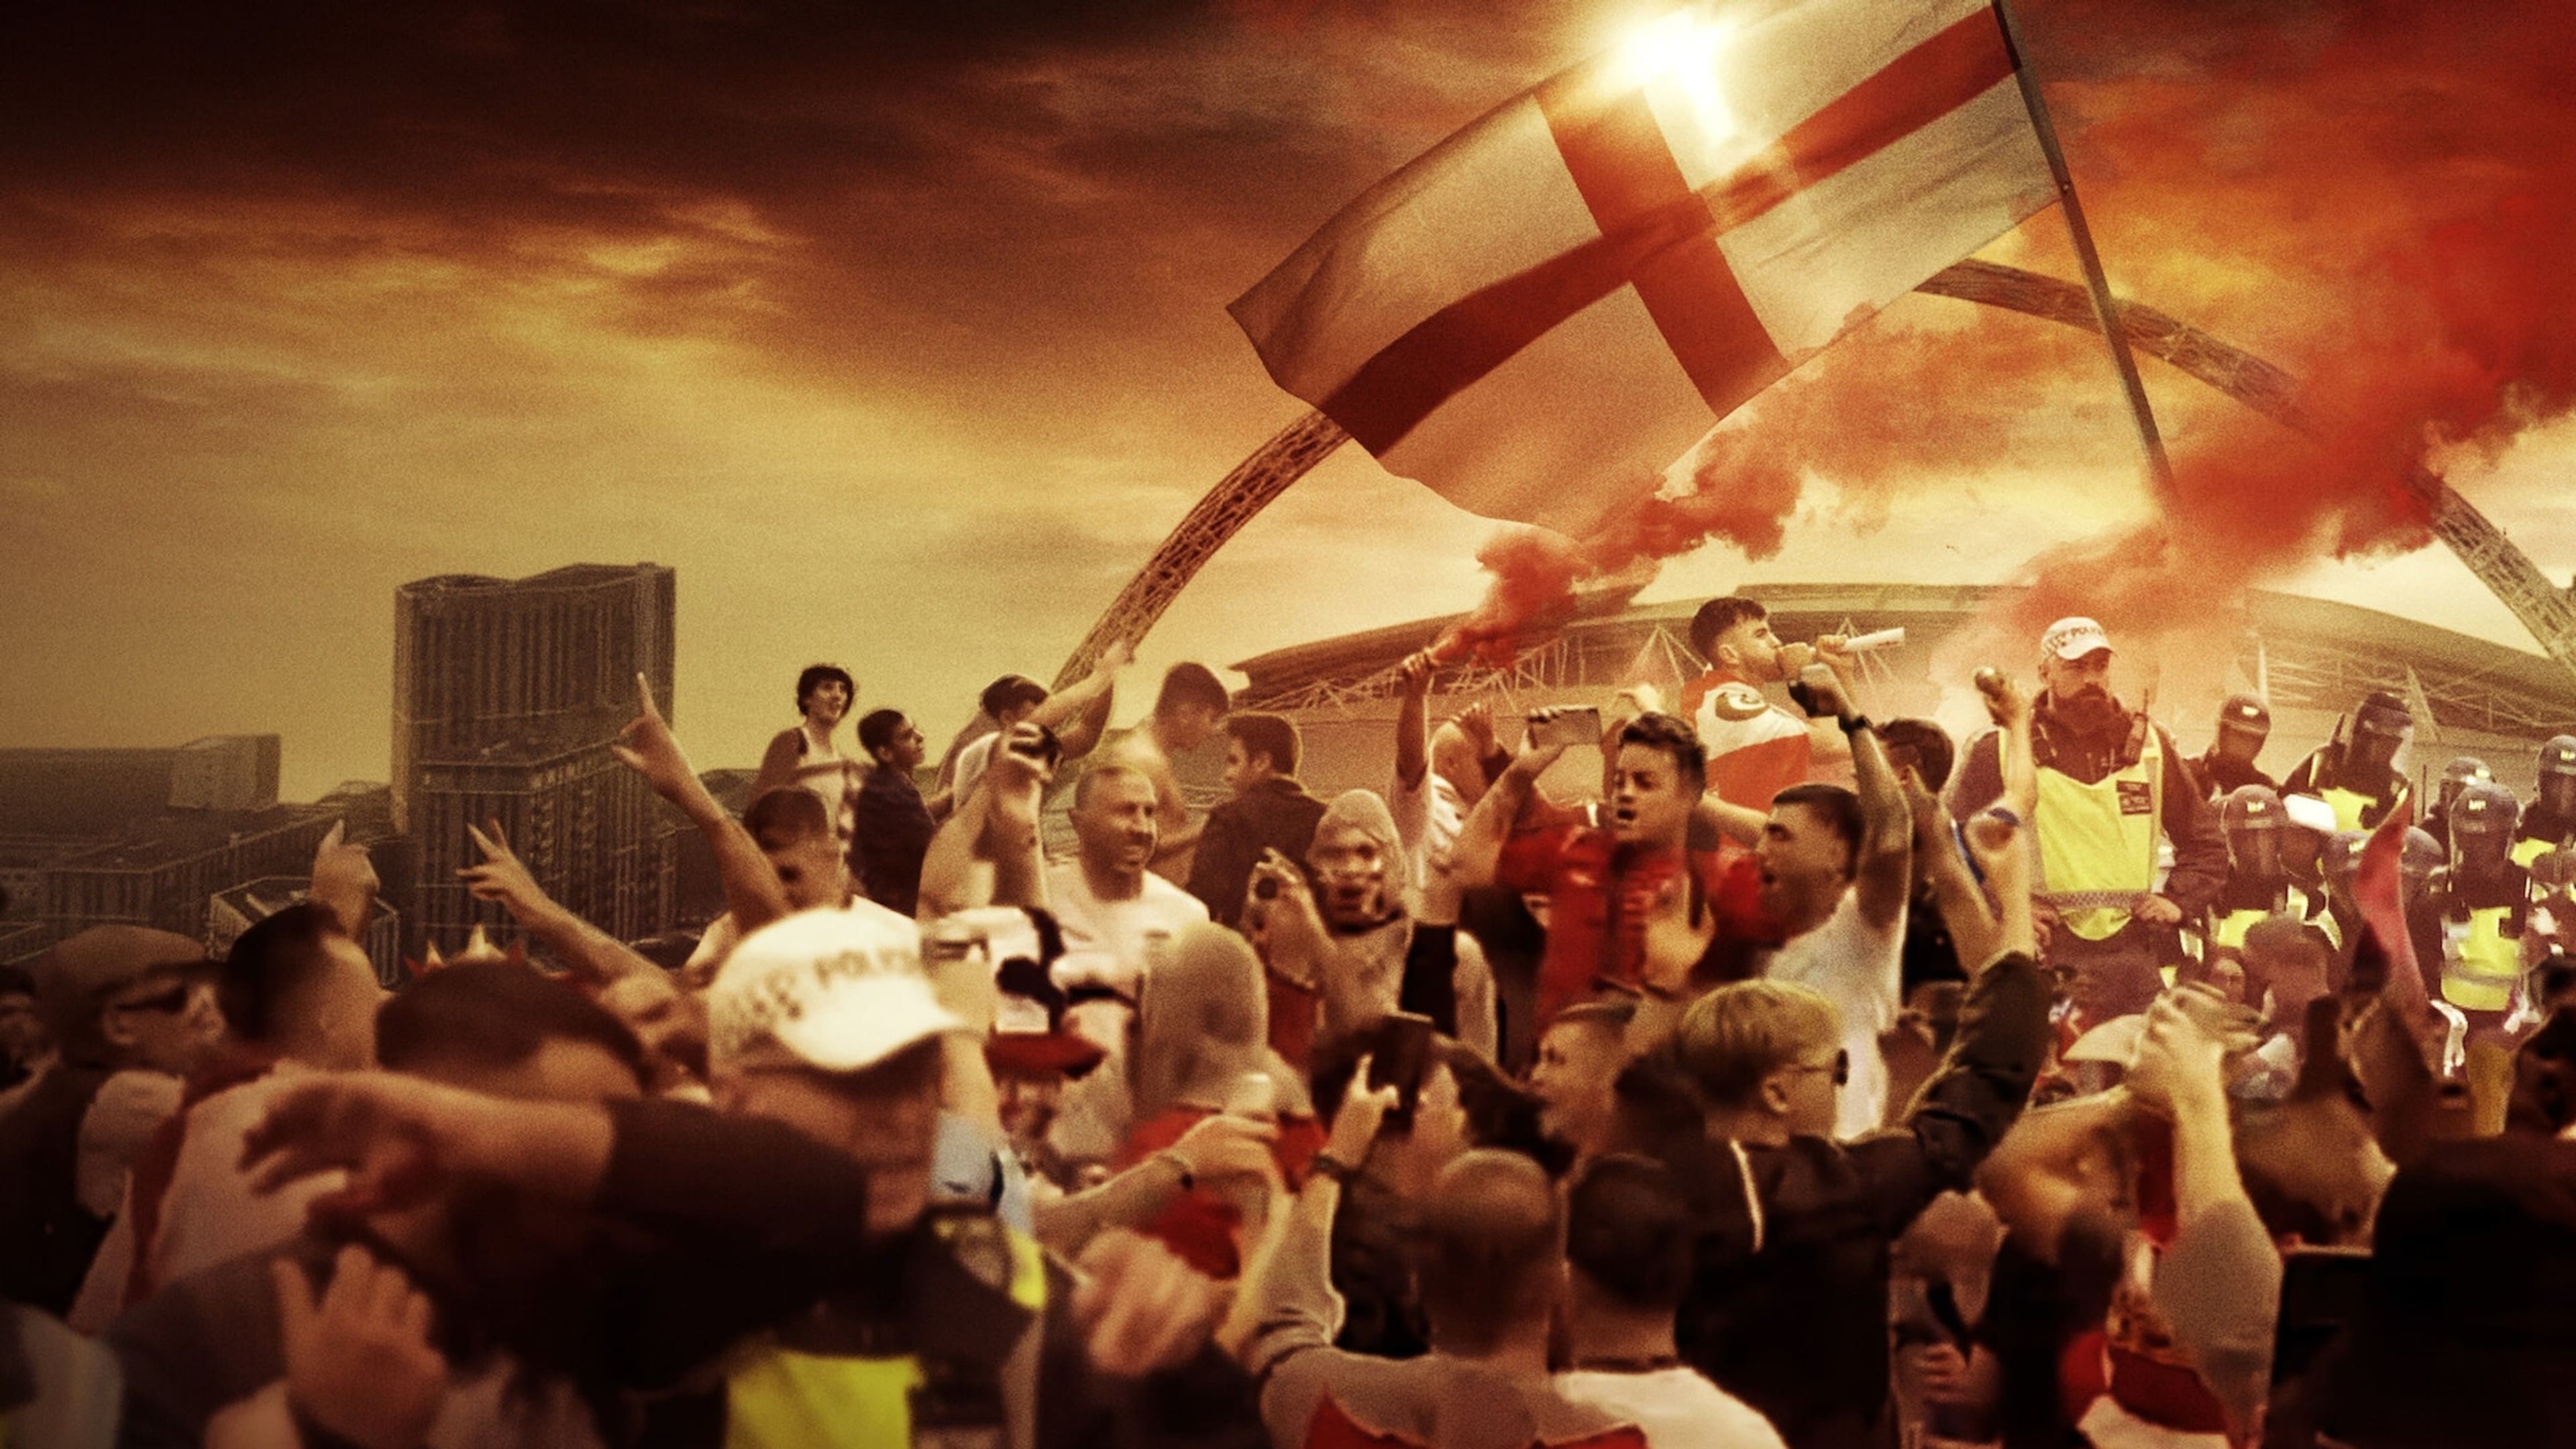 The Final: Attack on Wembley (2024)